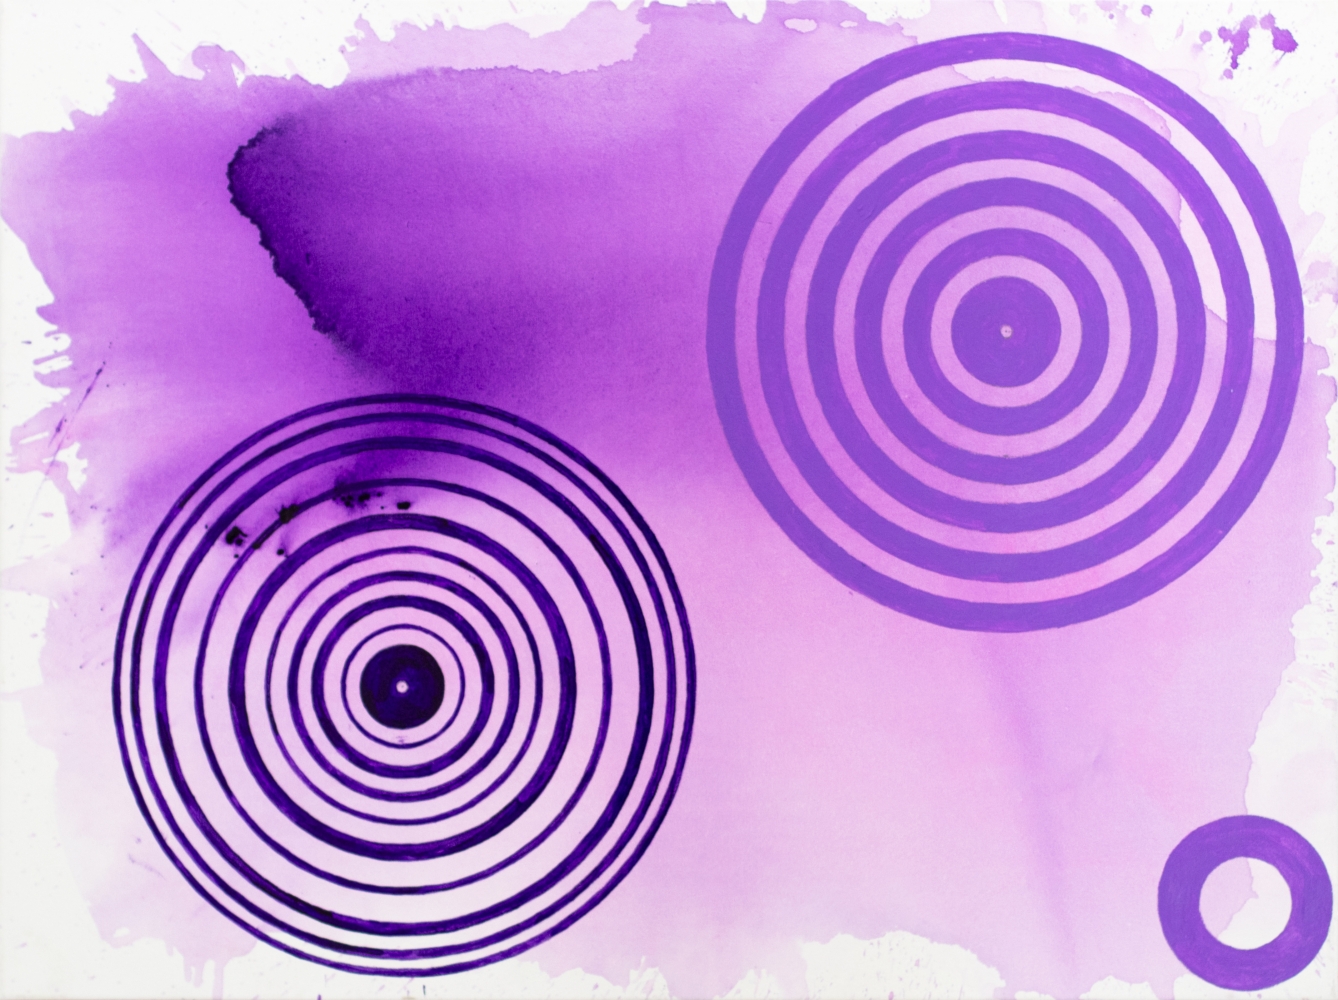 J. Steven Manolis, PurpleFields (Concentric),  2020, Acrylic on canvas, 48 x 36 inches, for sale at Manolis Projects Art Gallery